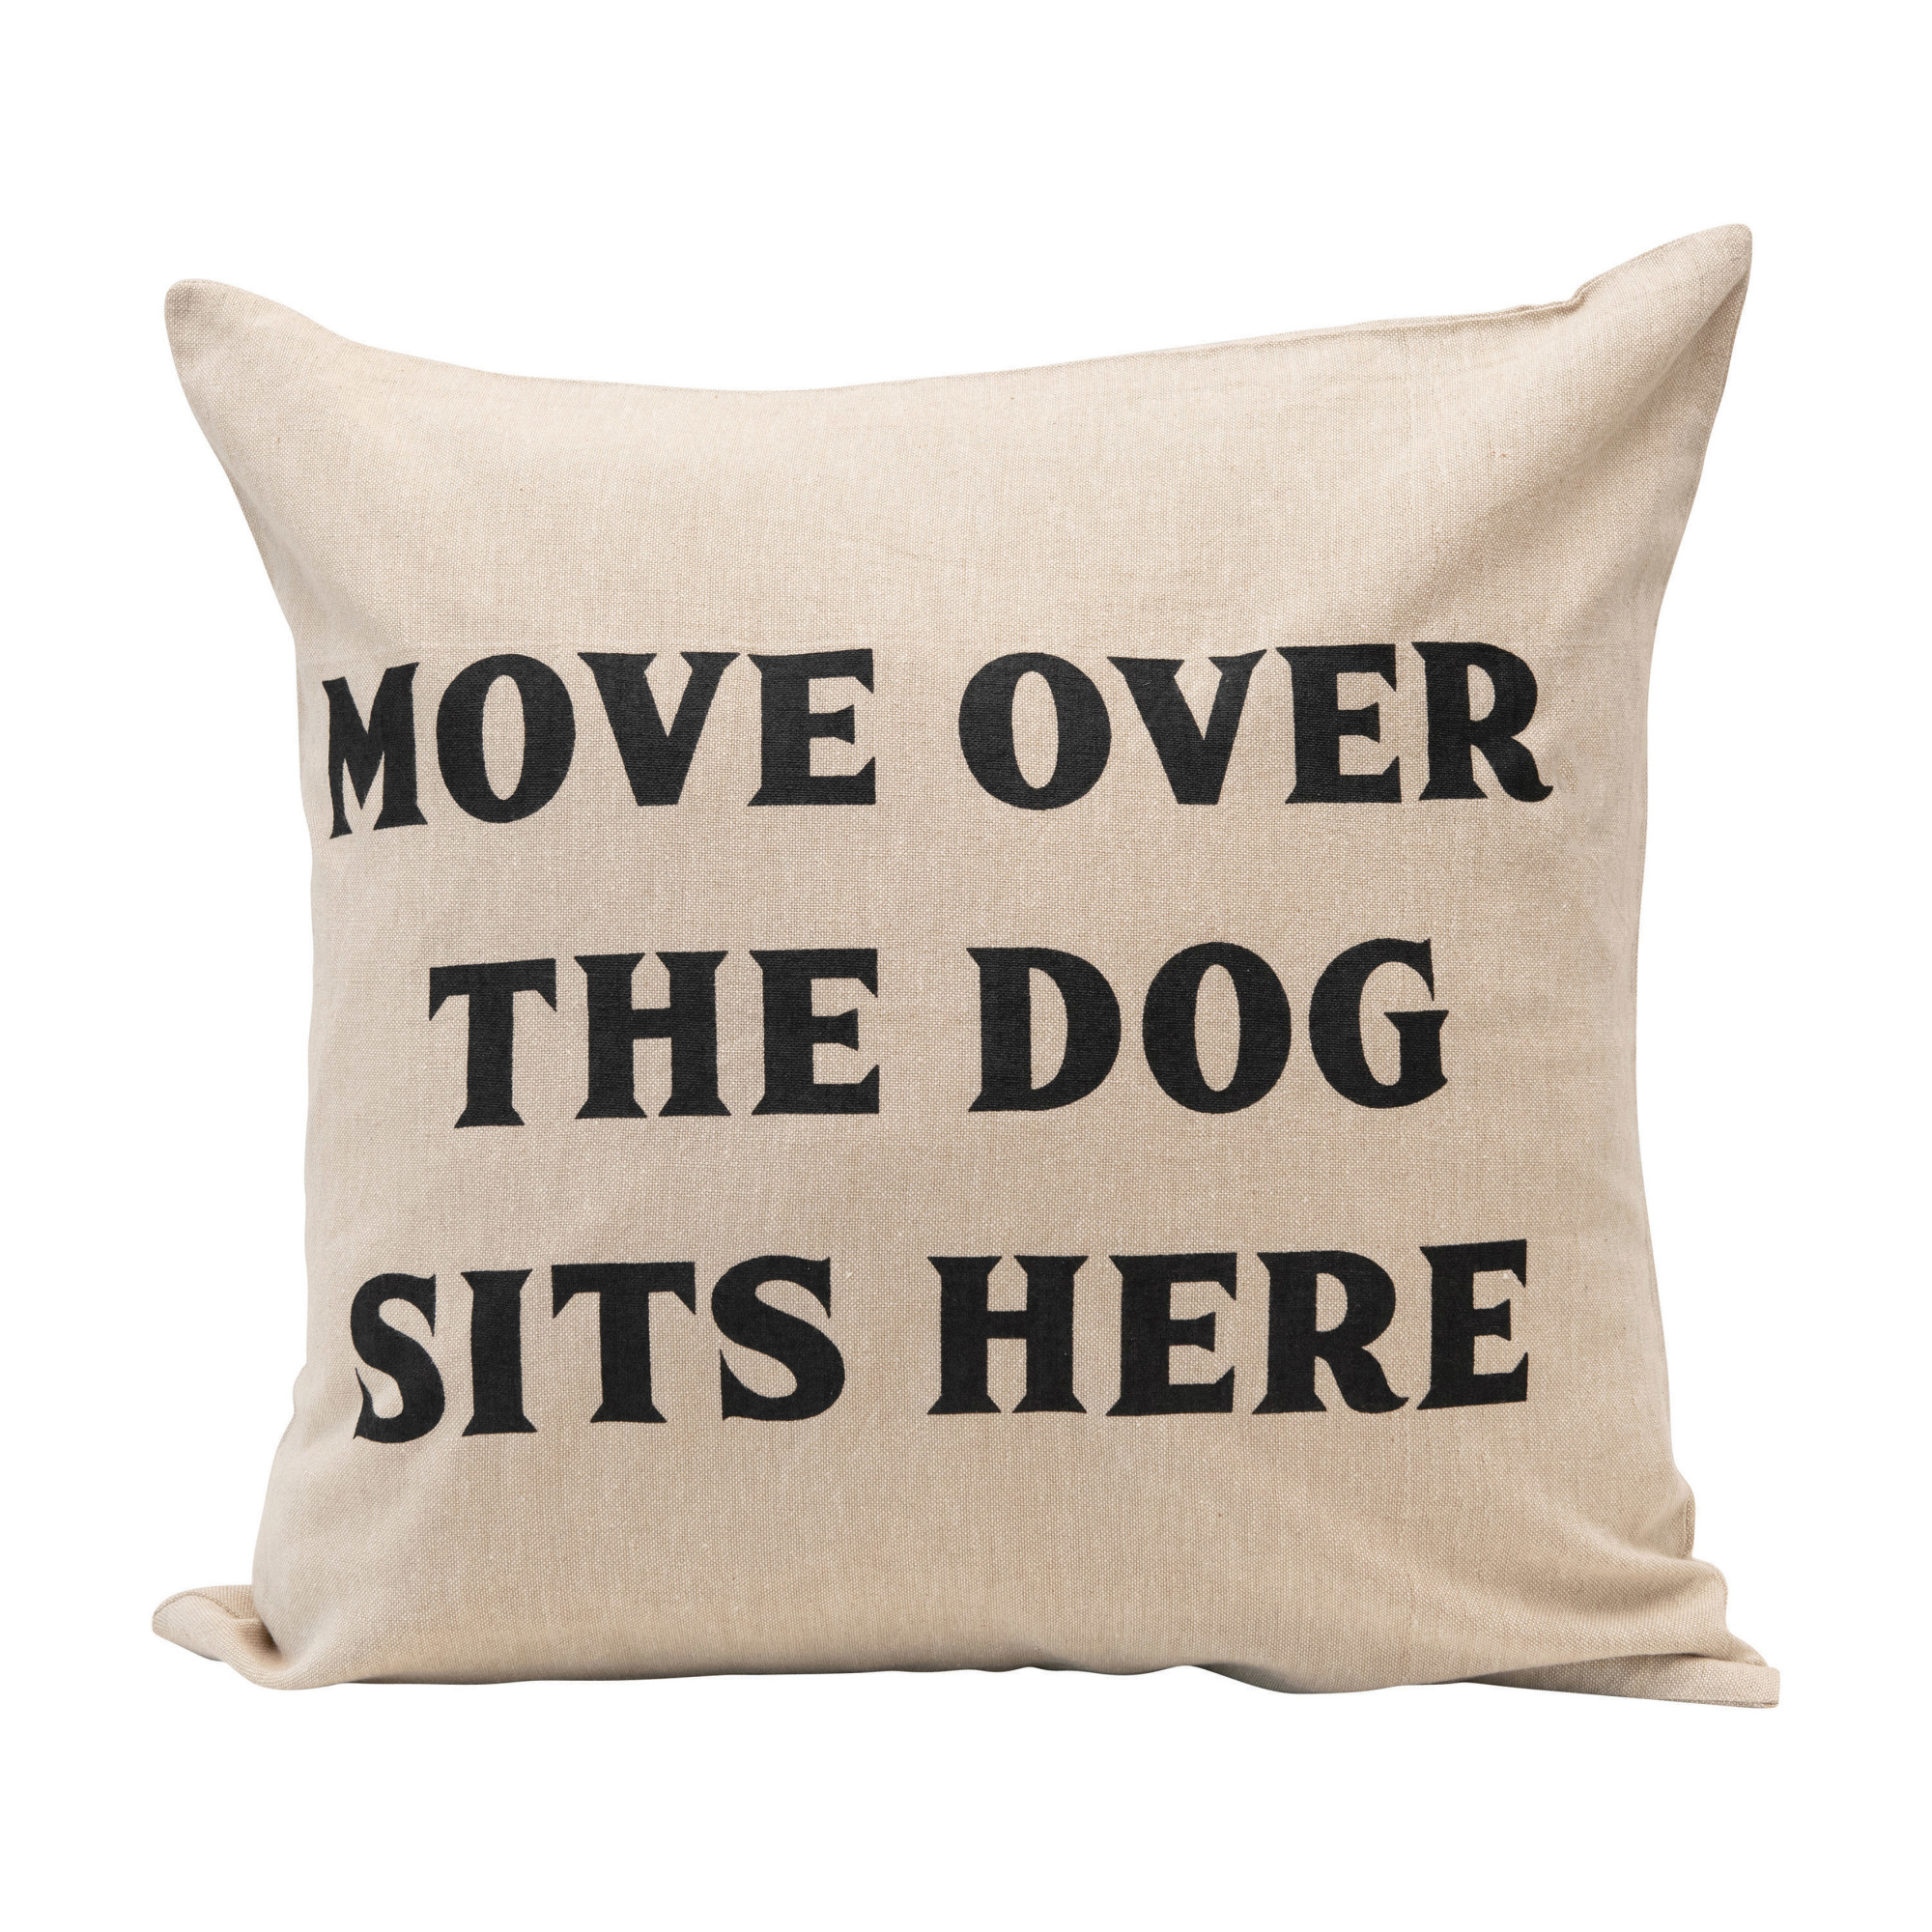 18" Square Cotton Pillow "Move Over The Dog Sits Here", Natural & Black